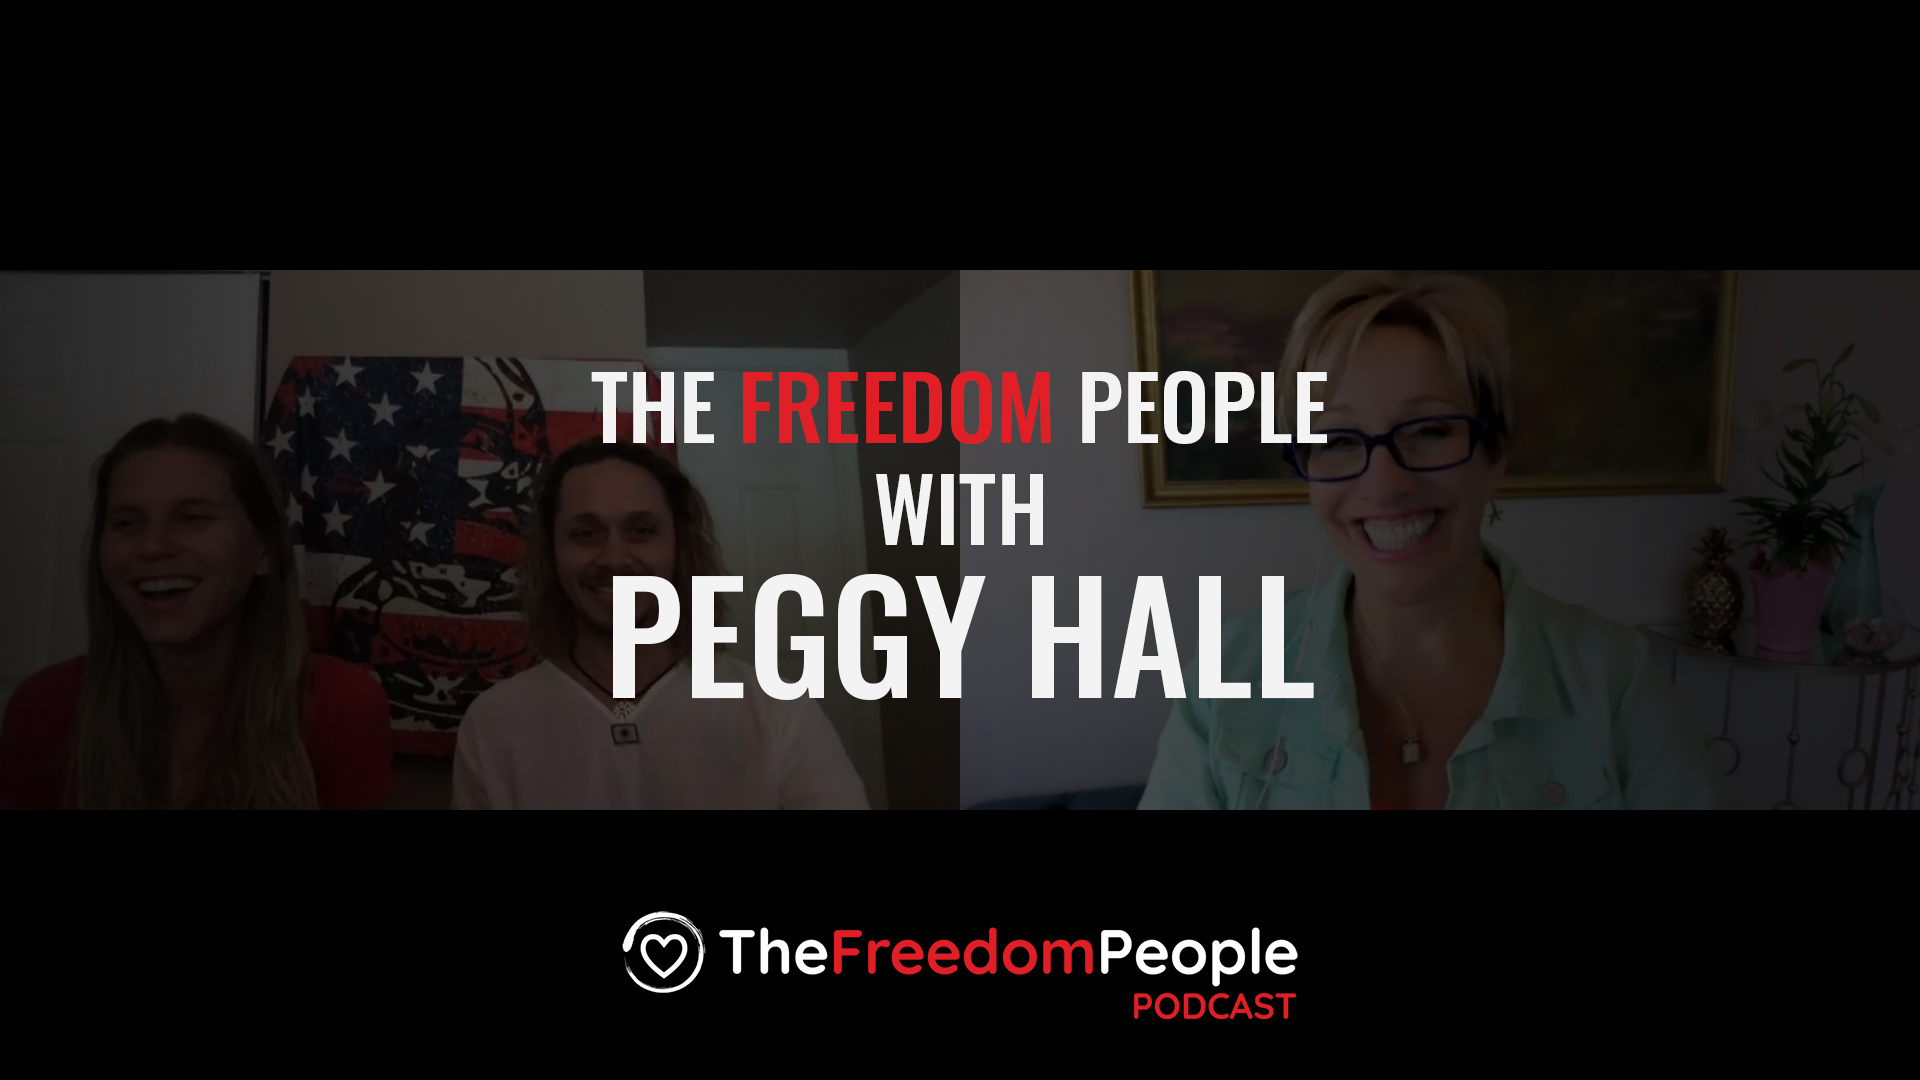 Live with Peggy Hall!